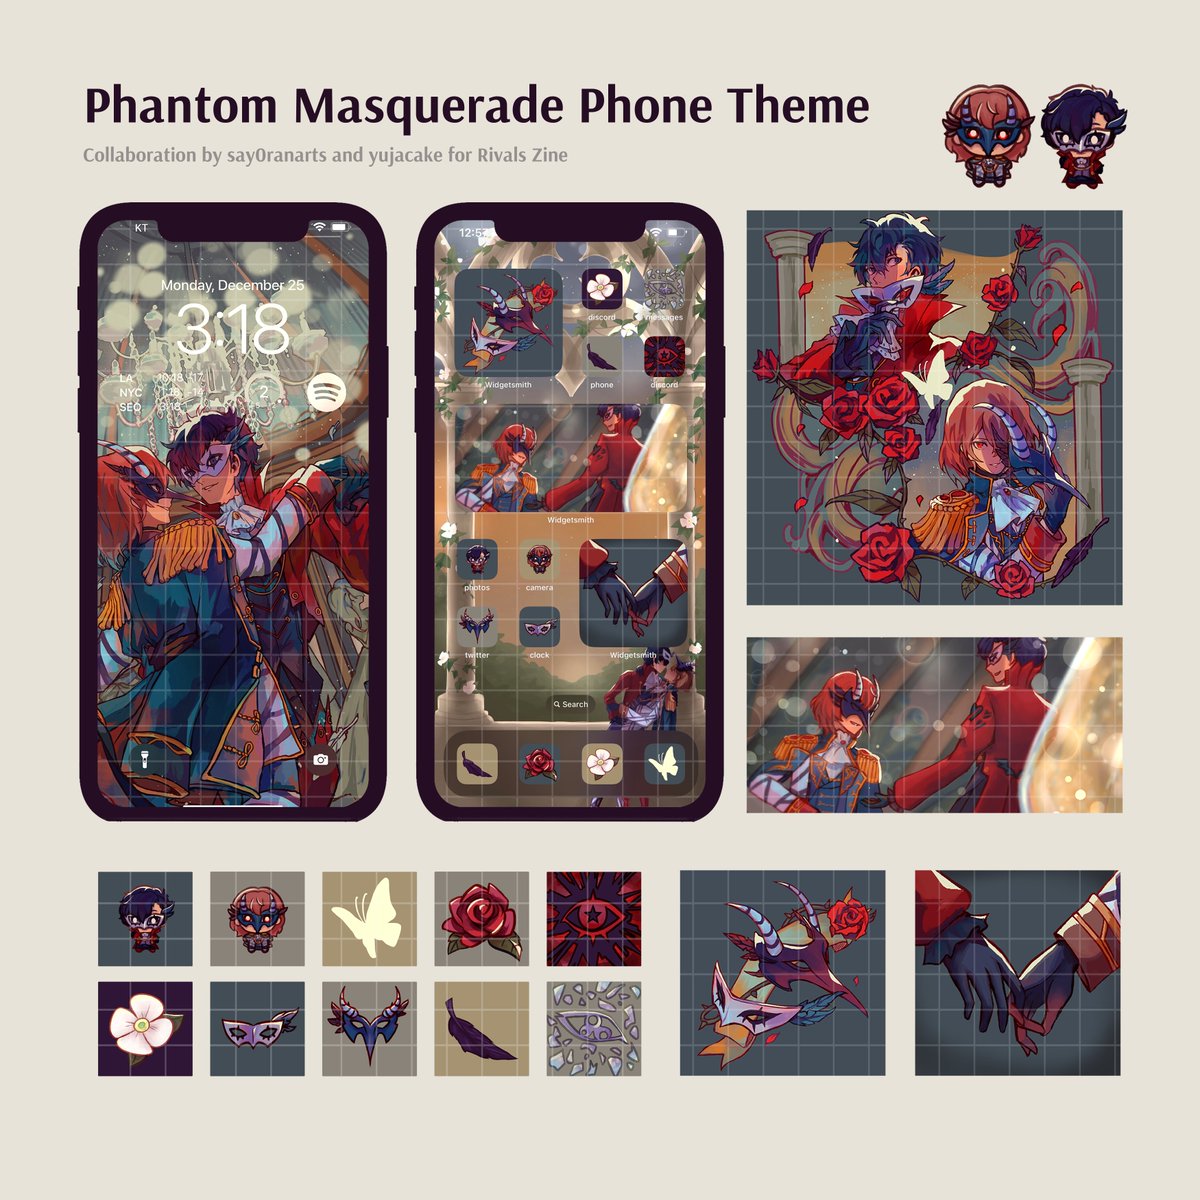 ✨ Presenting the phone theme created in collaboration with @say0ranarts for Rivals Zine!! ✨ - If you missed the initial distribution, it is now available on k0-fi (details ⬇️)